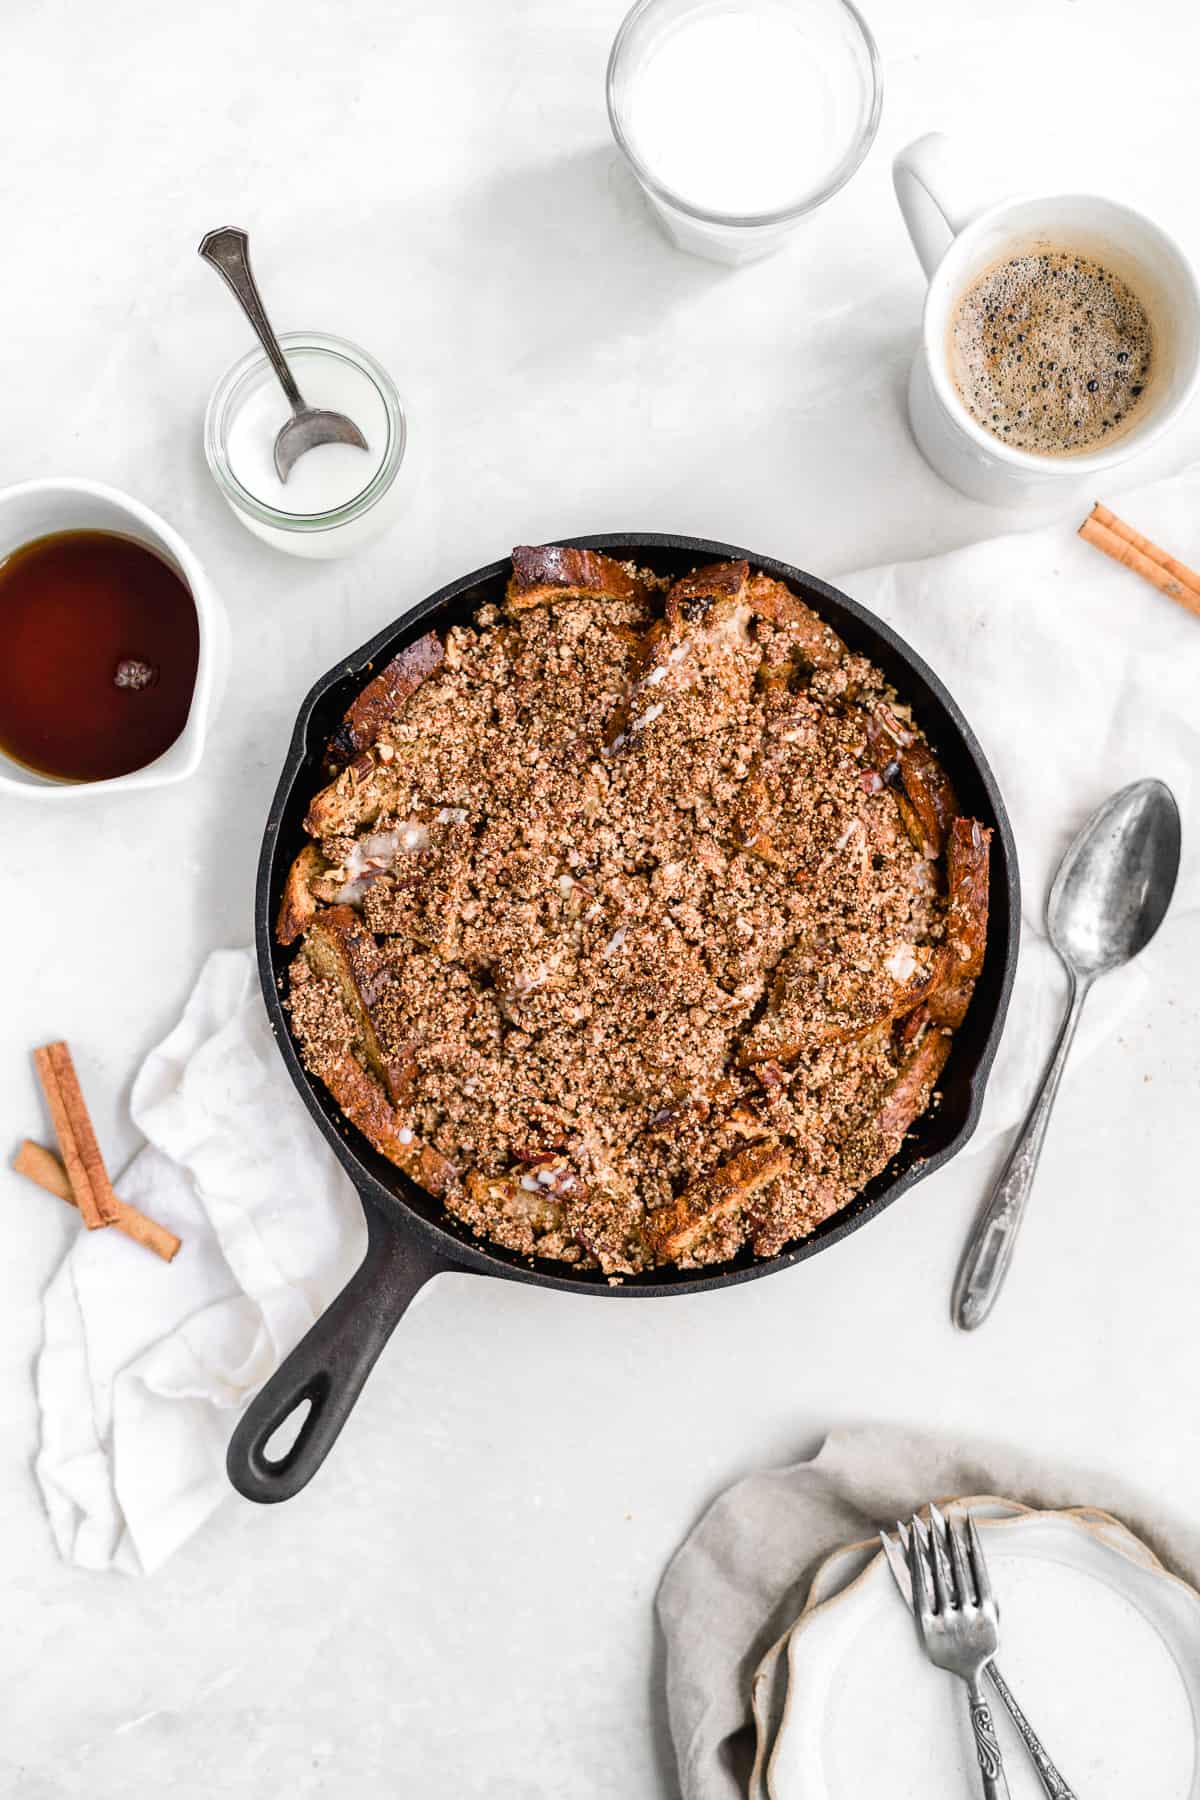 Overhead photo of the freshly baked  Maple Cinnamon Raisin Dairy-free French Toast Skillet Casserole in a cast iron skillet on a white marble slab.  A spoon, cinnamon sticks and several scalloped plates and forks are sitting nearby.  